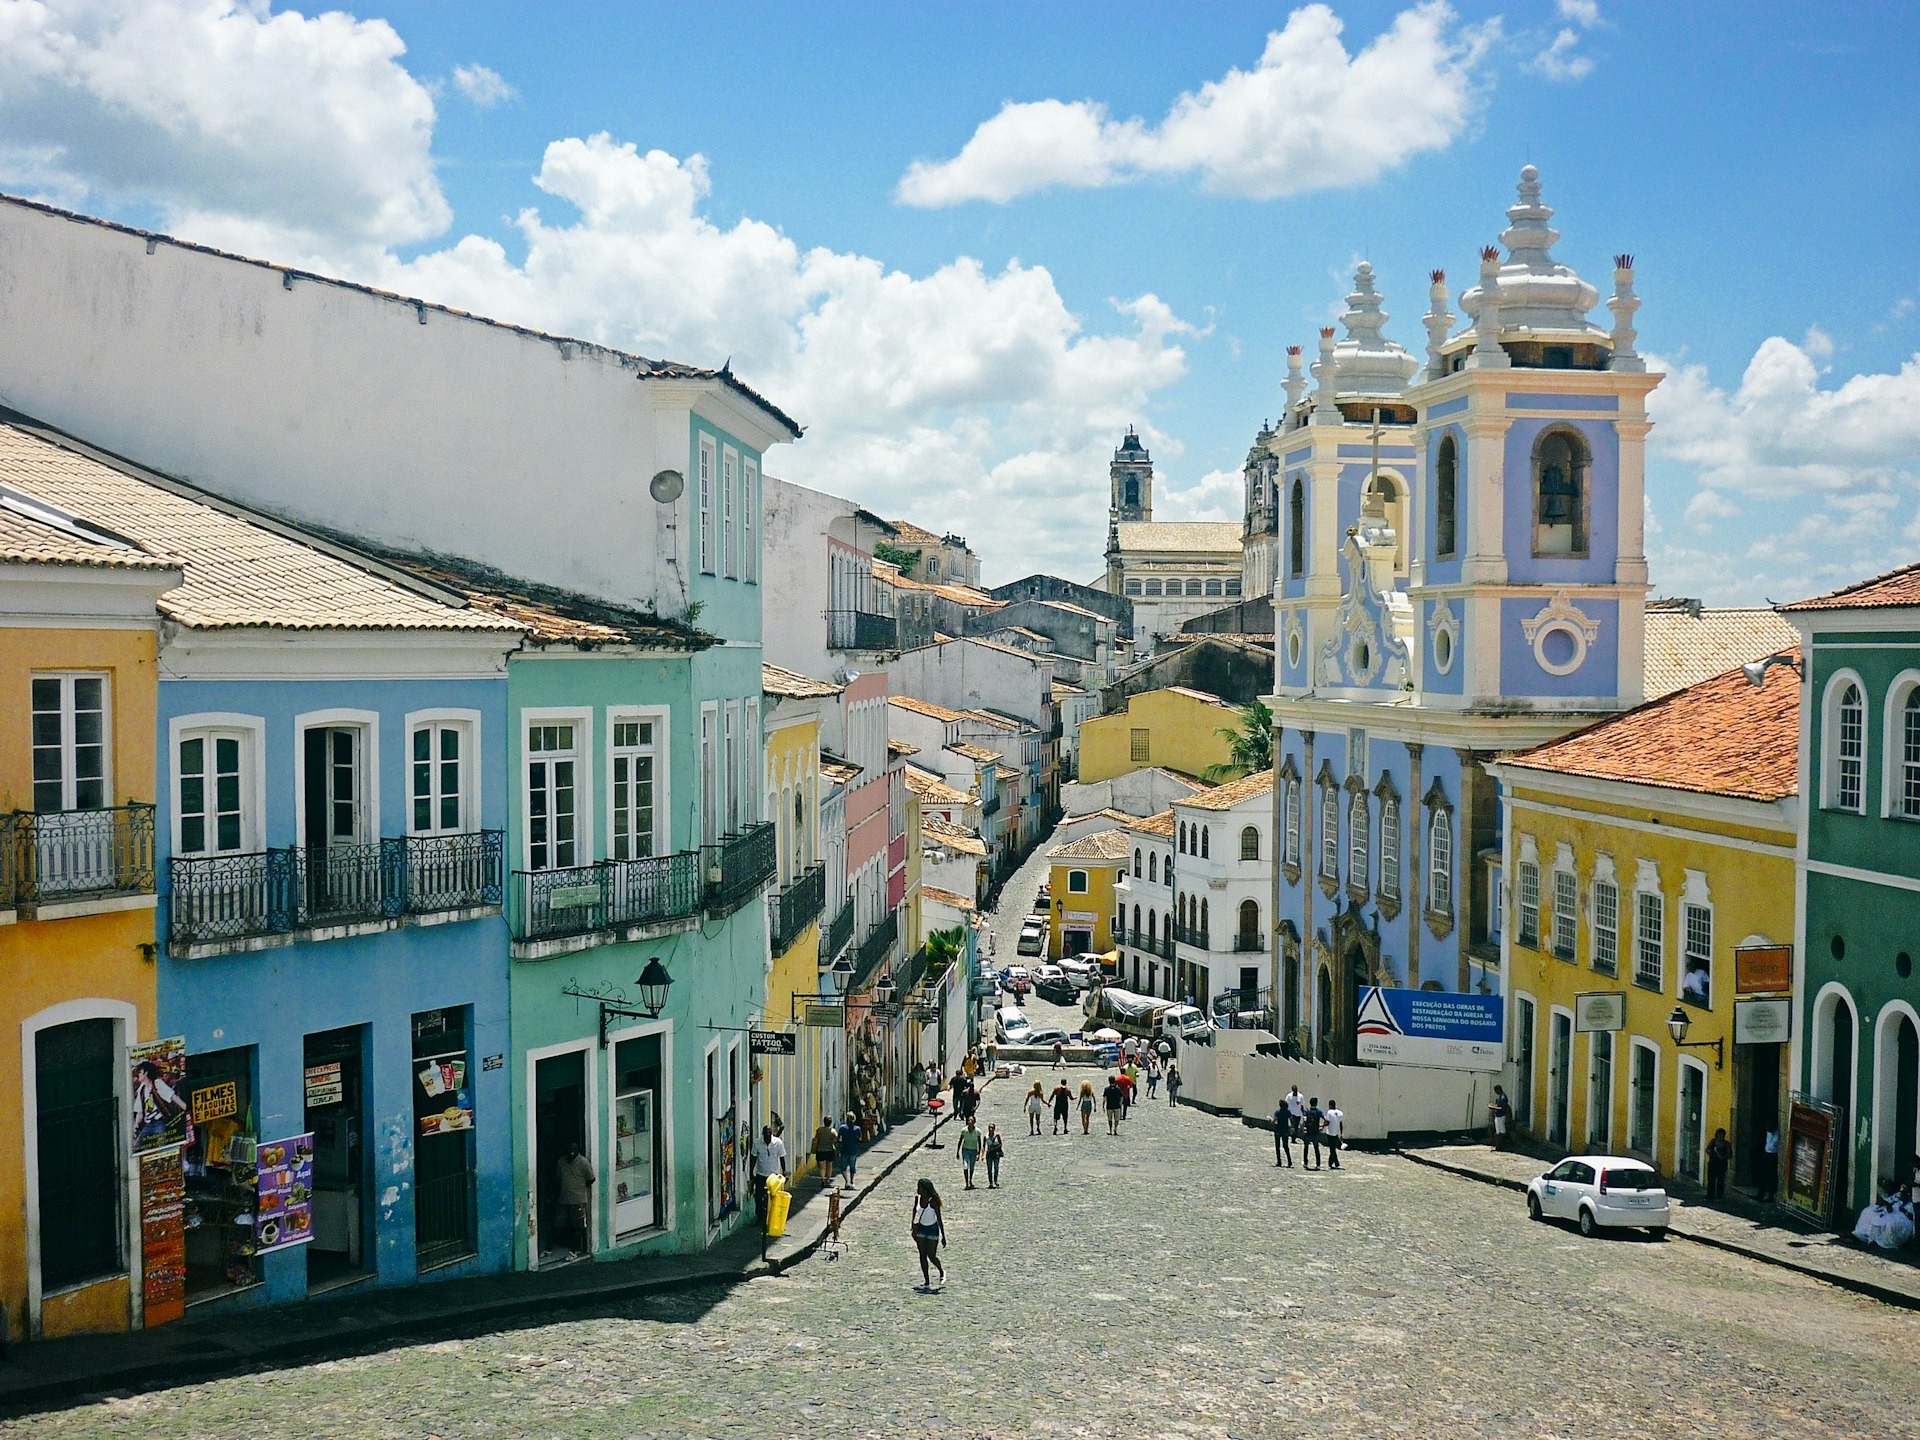 Colorful buildings along a street in Salvador, Brazil